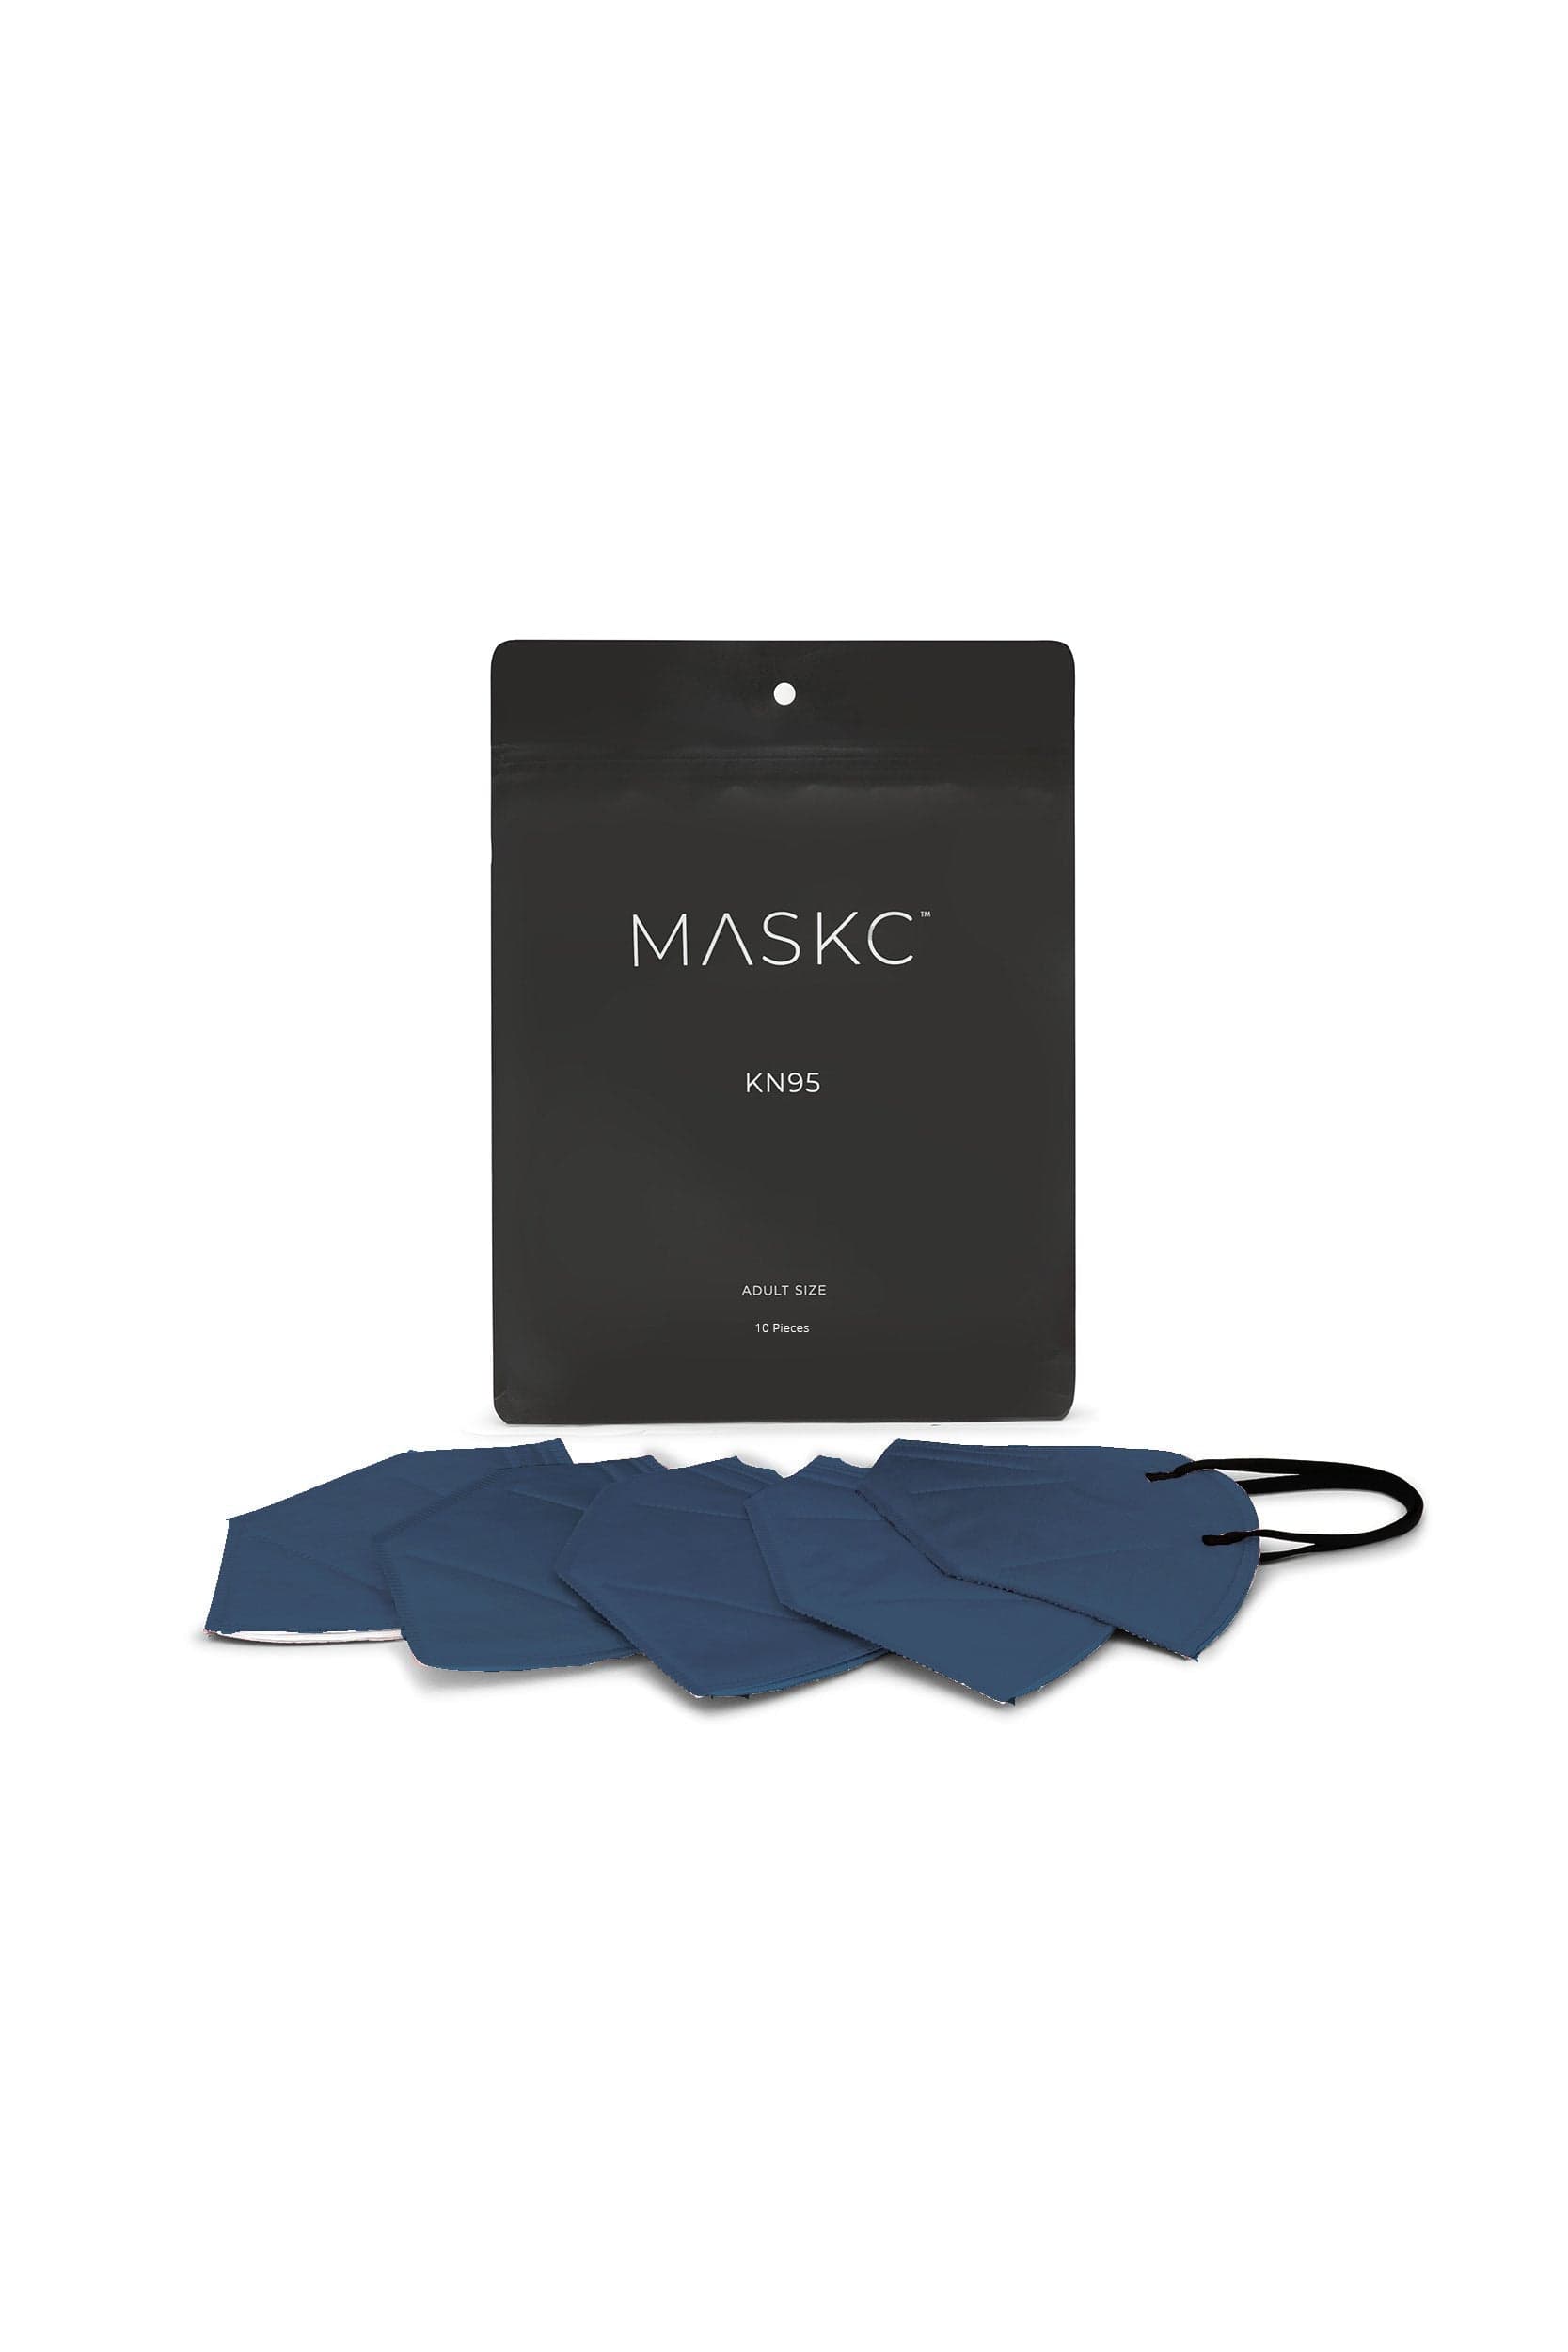 Pack of Navy Blue KN95 face masks. Each pack contains stylish high quality face masks. 